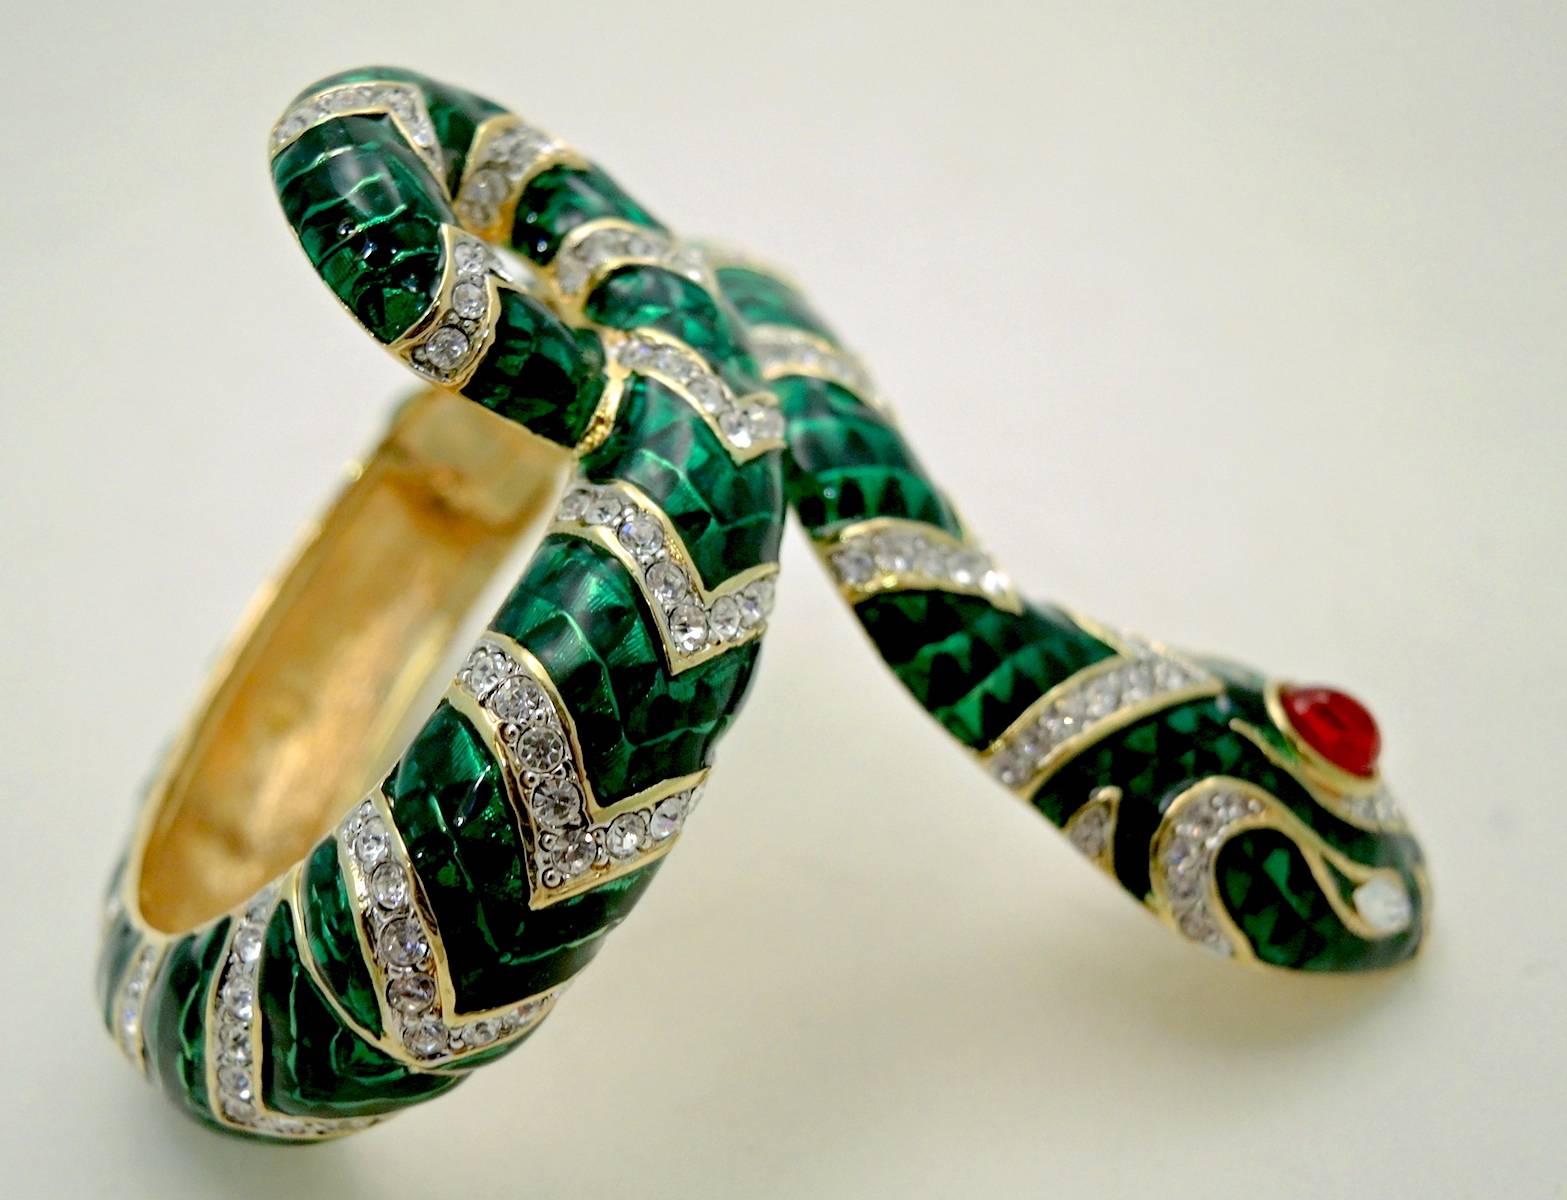 This is one of Kenneth Jay Lane’s gorgeous serpent bracelets that is made with green enamel and beautiful clear crystals. It has a large red crystal on the top of the head and teardrop shaped clear crystal eyes. It measures 8” x 3-3/8” at the widest